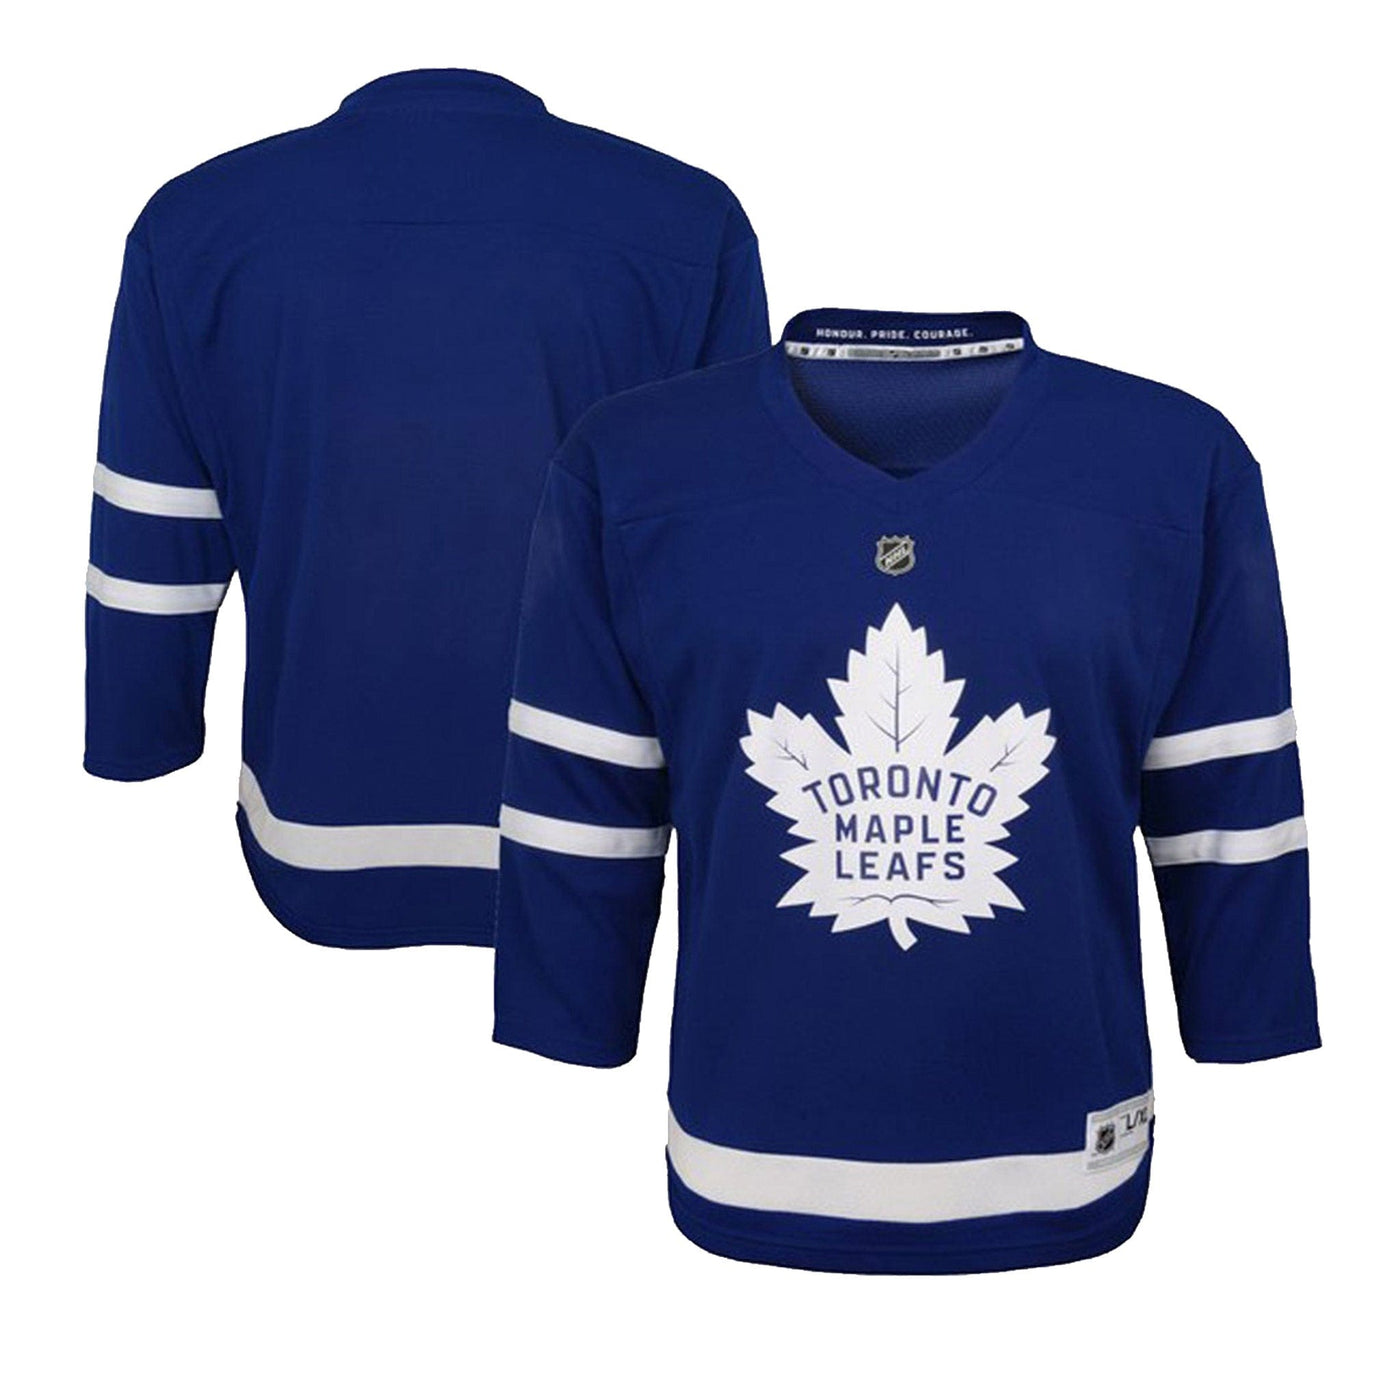 Toronto Maple Leafs Home Outer Stuff Replica Youth Jersey